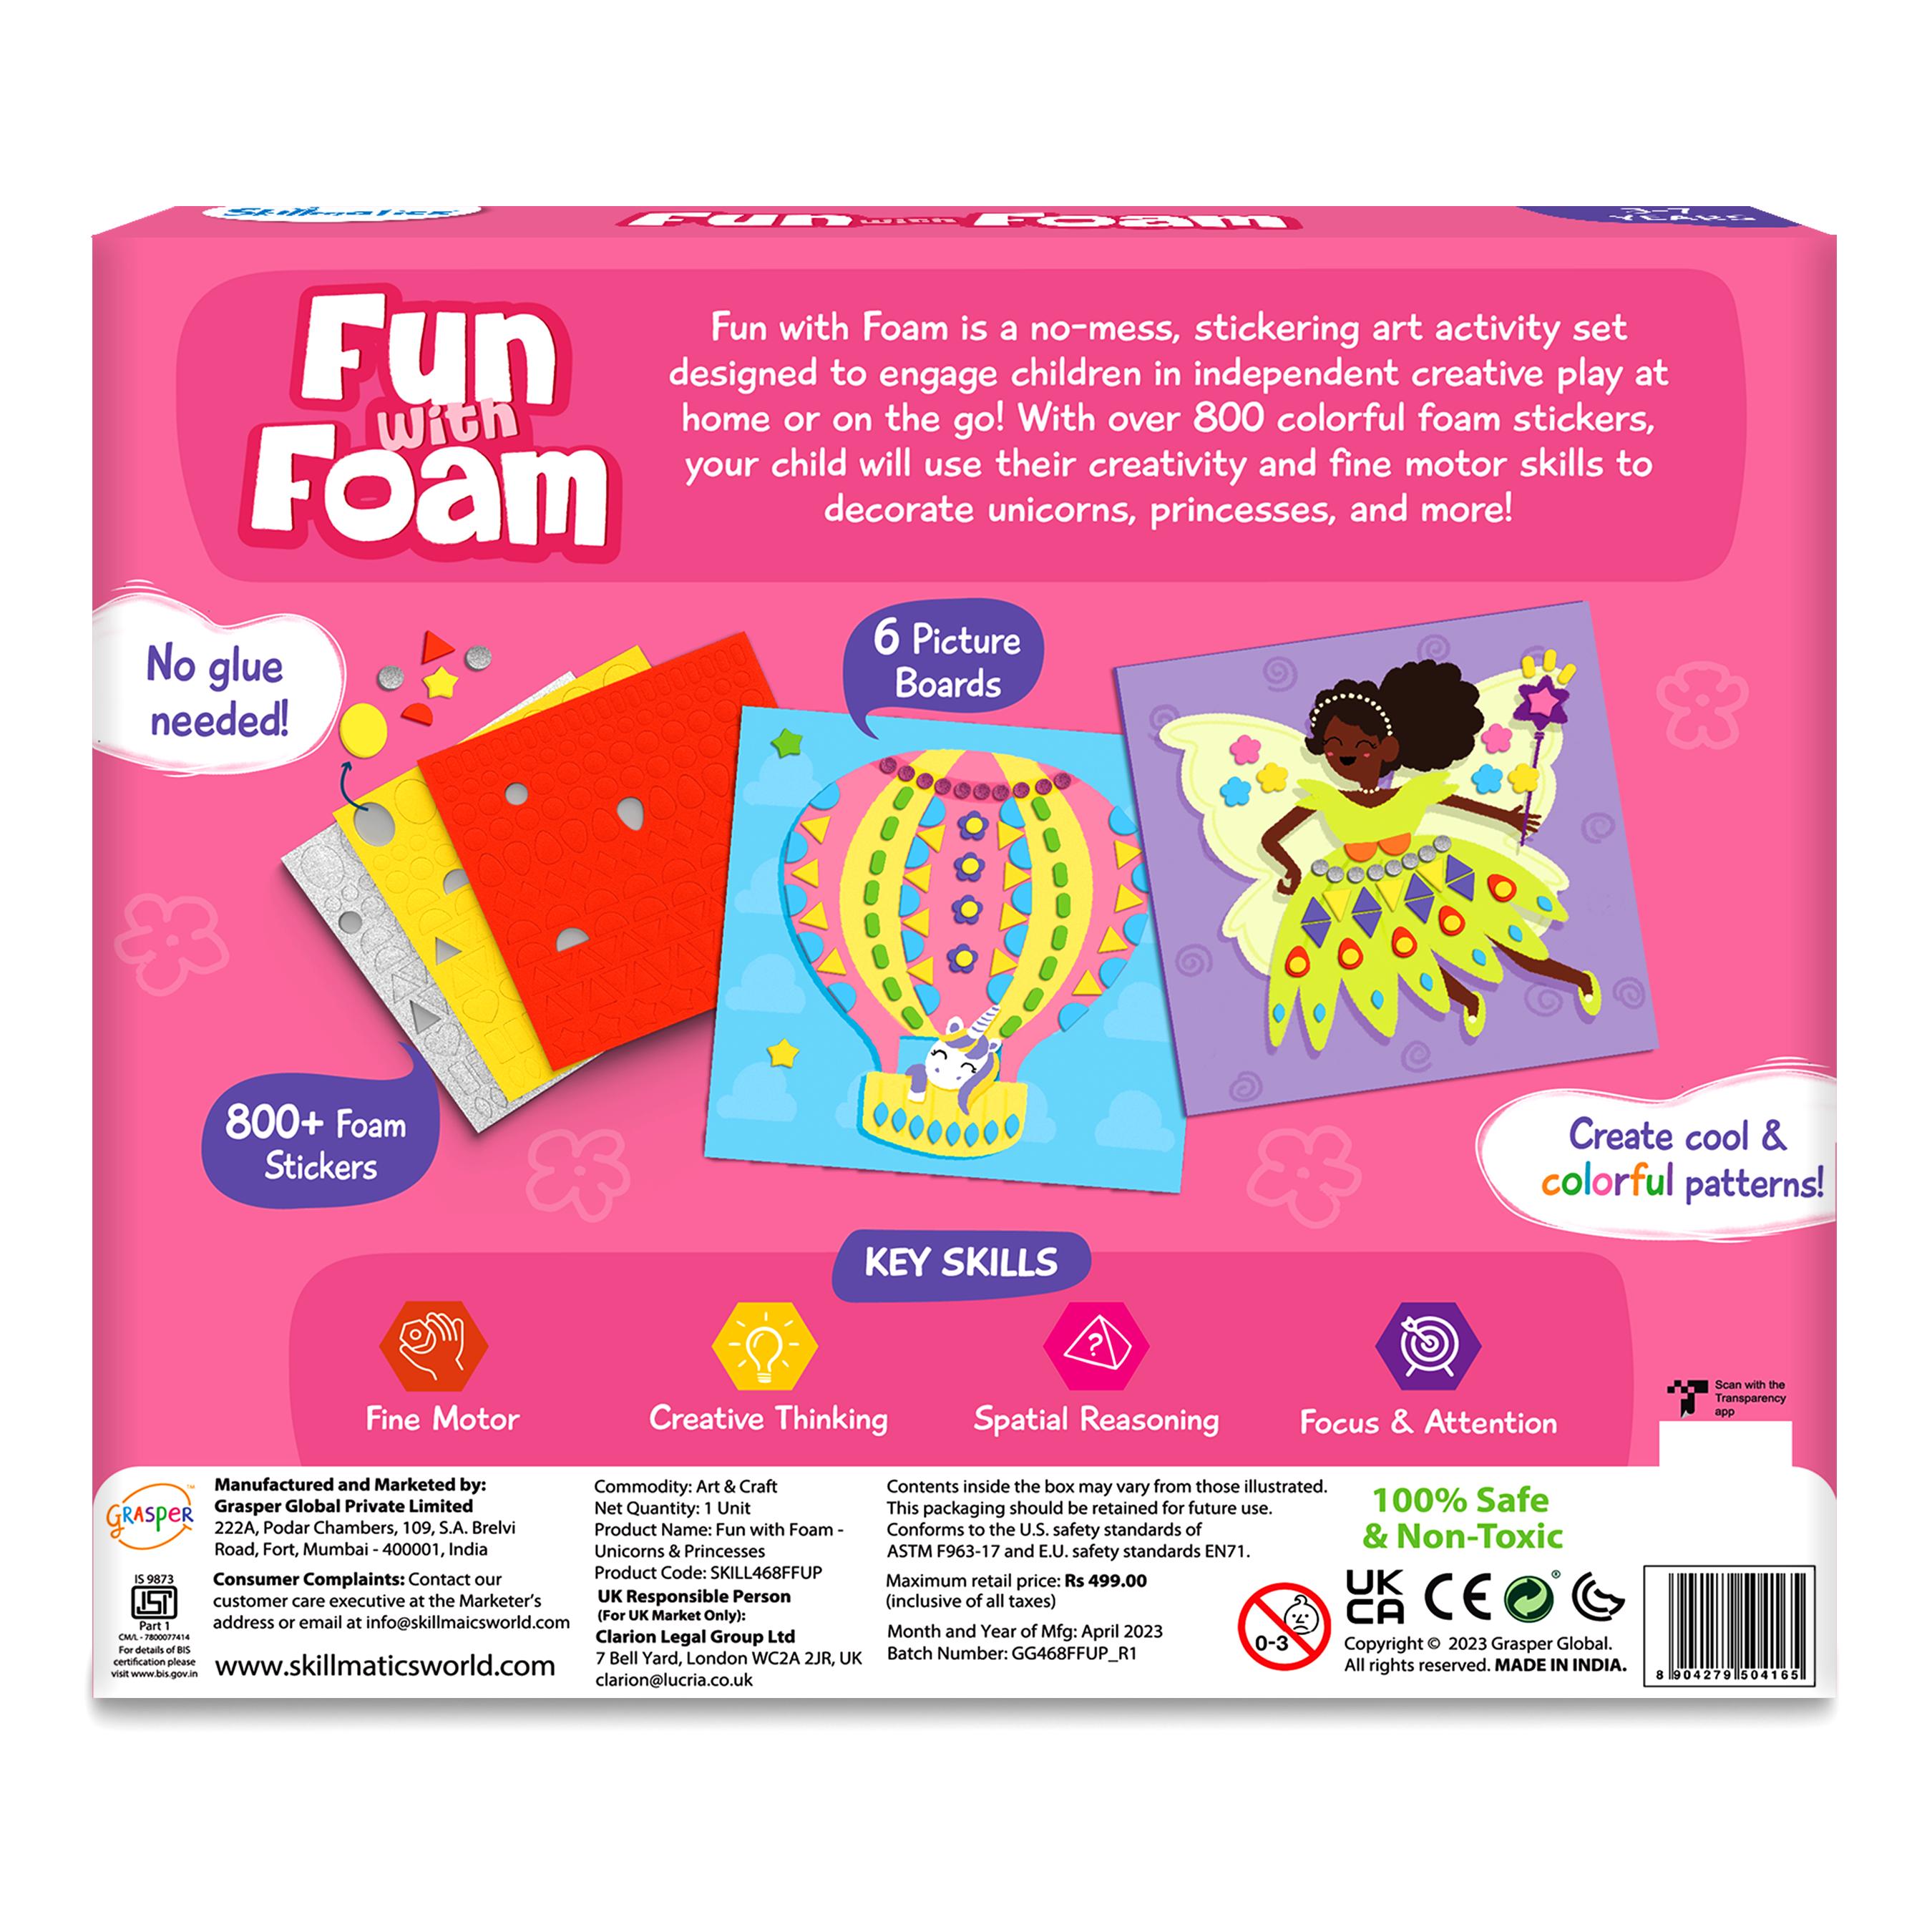 Skillmatics Art Activity - Fun With Foam, No Mess Sticker Art, 6 Unicorn & Princess Themed Pictures, Gifts For Ages 3 To 7